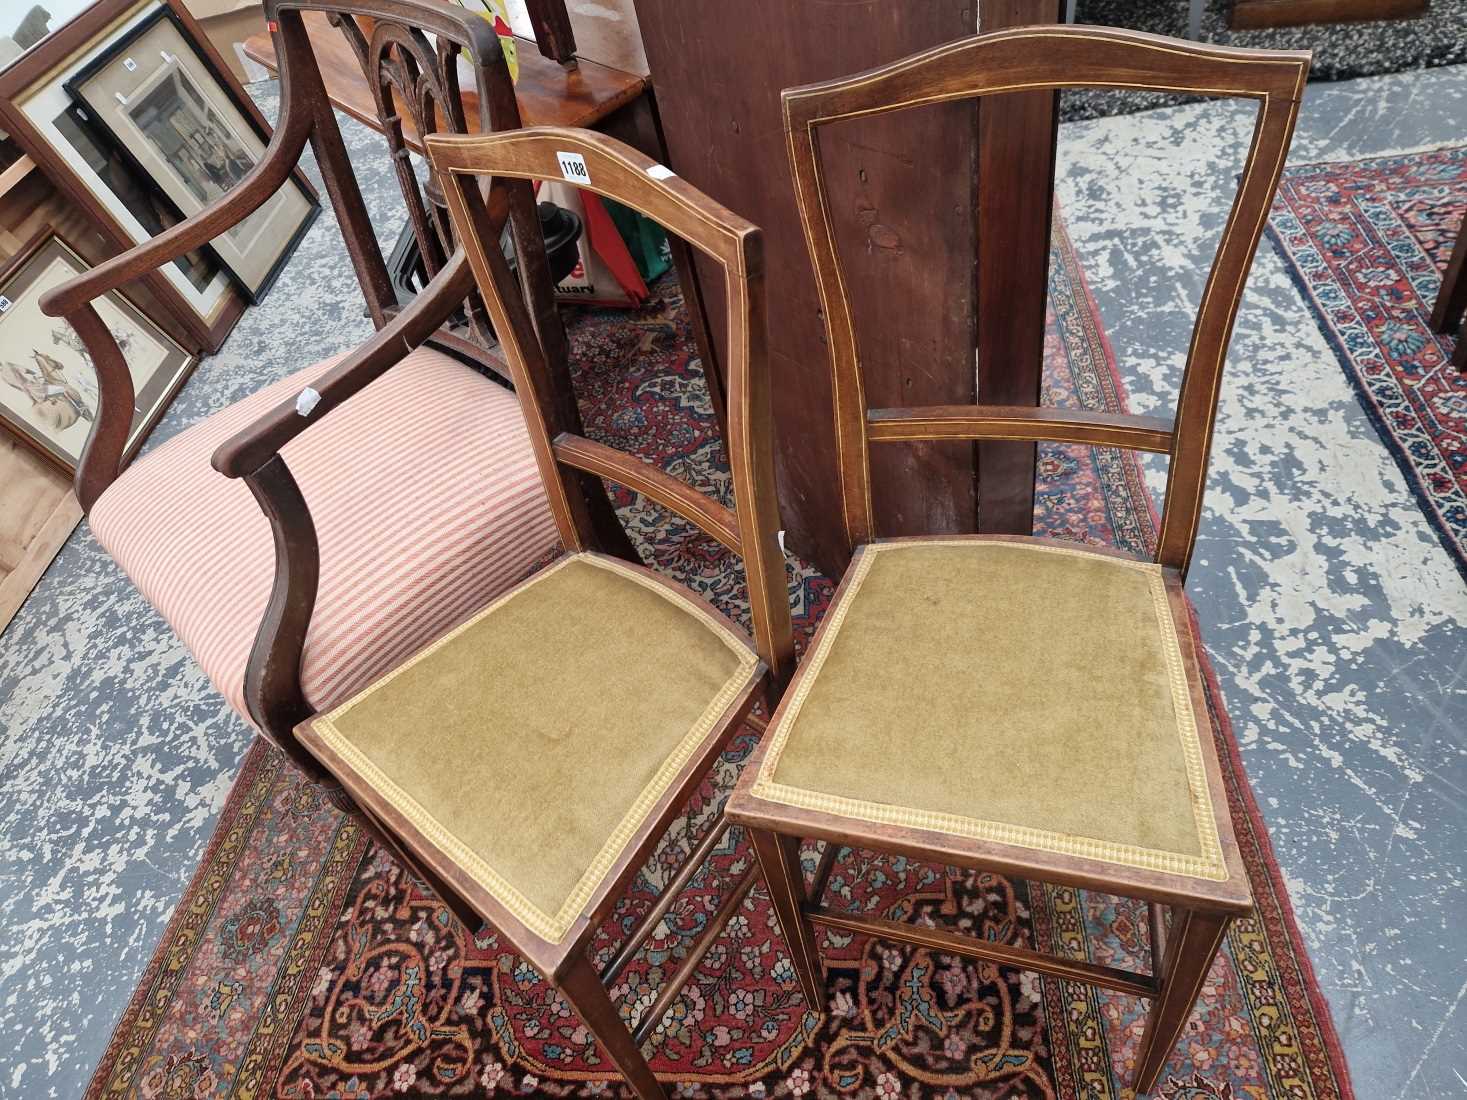 Edwardian armchair and two bedroom chairs.